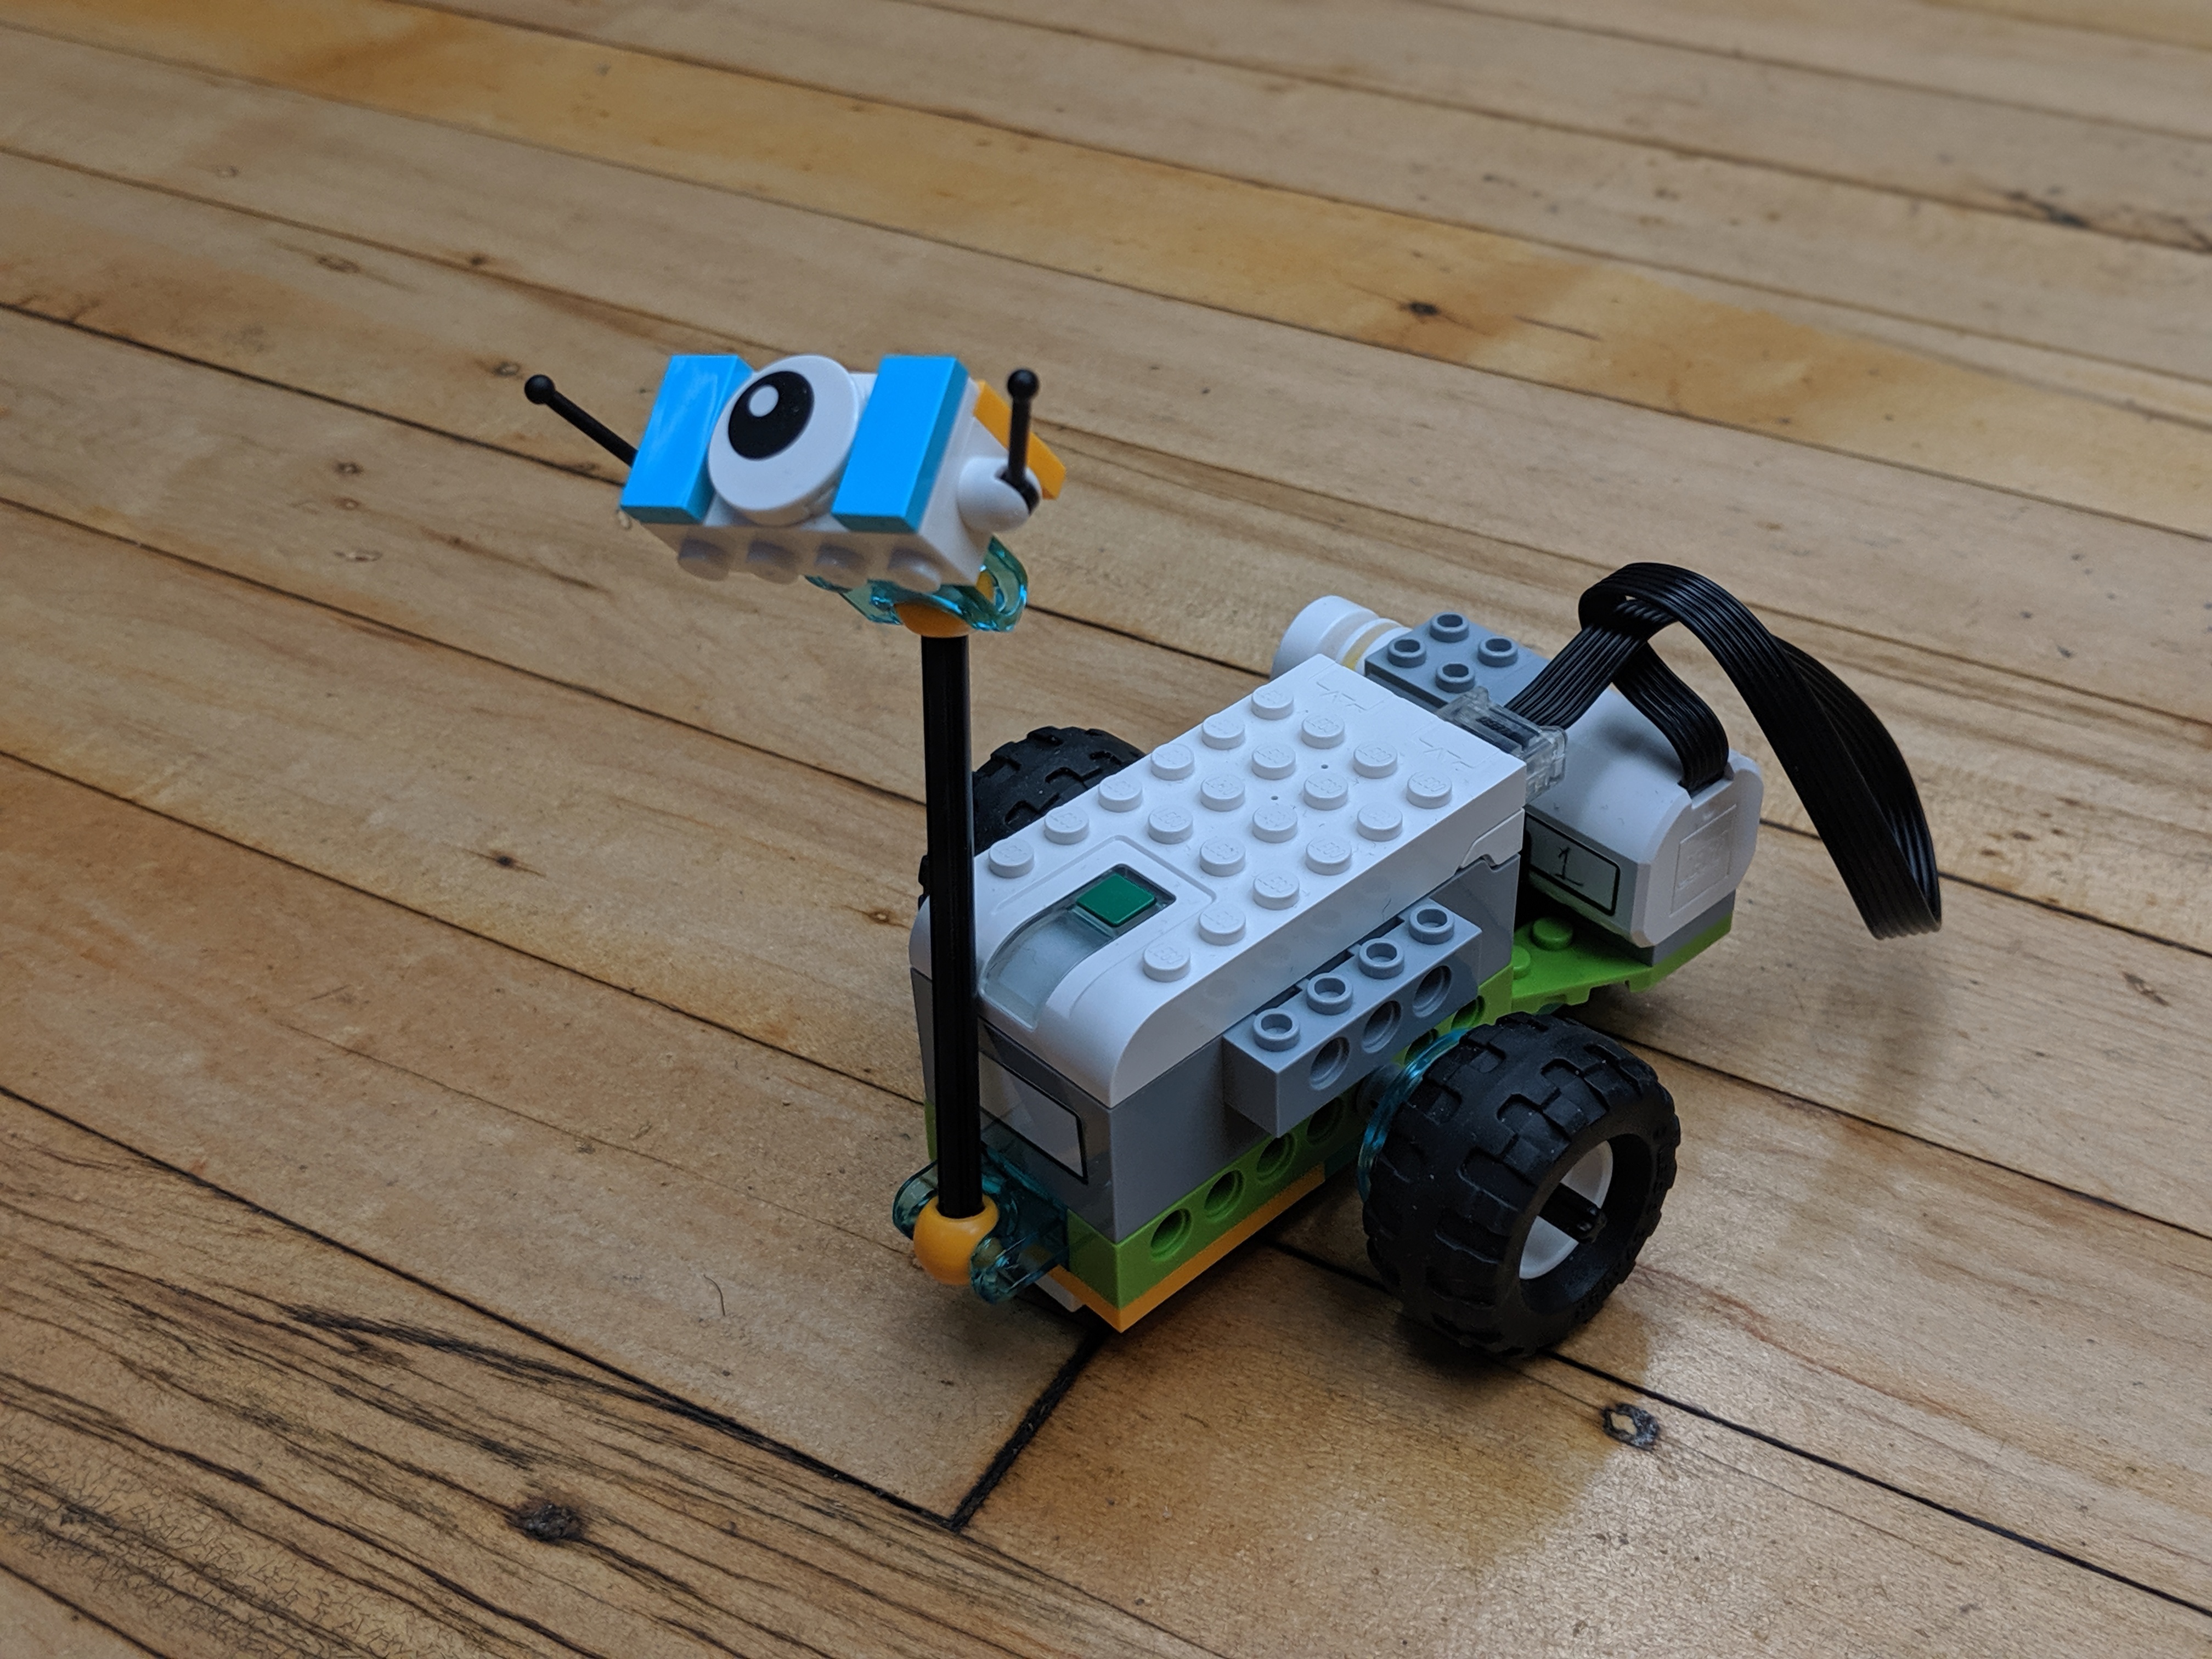 An image of Lego Boost robot